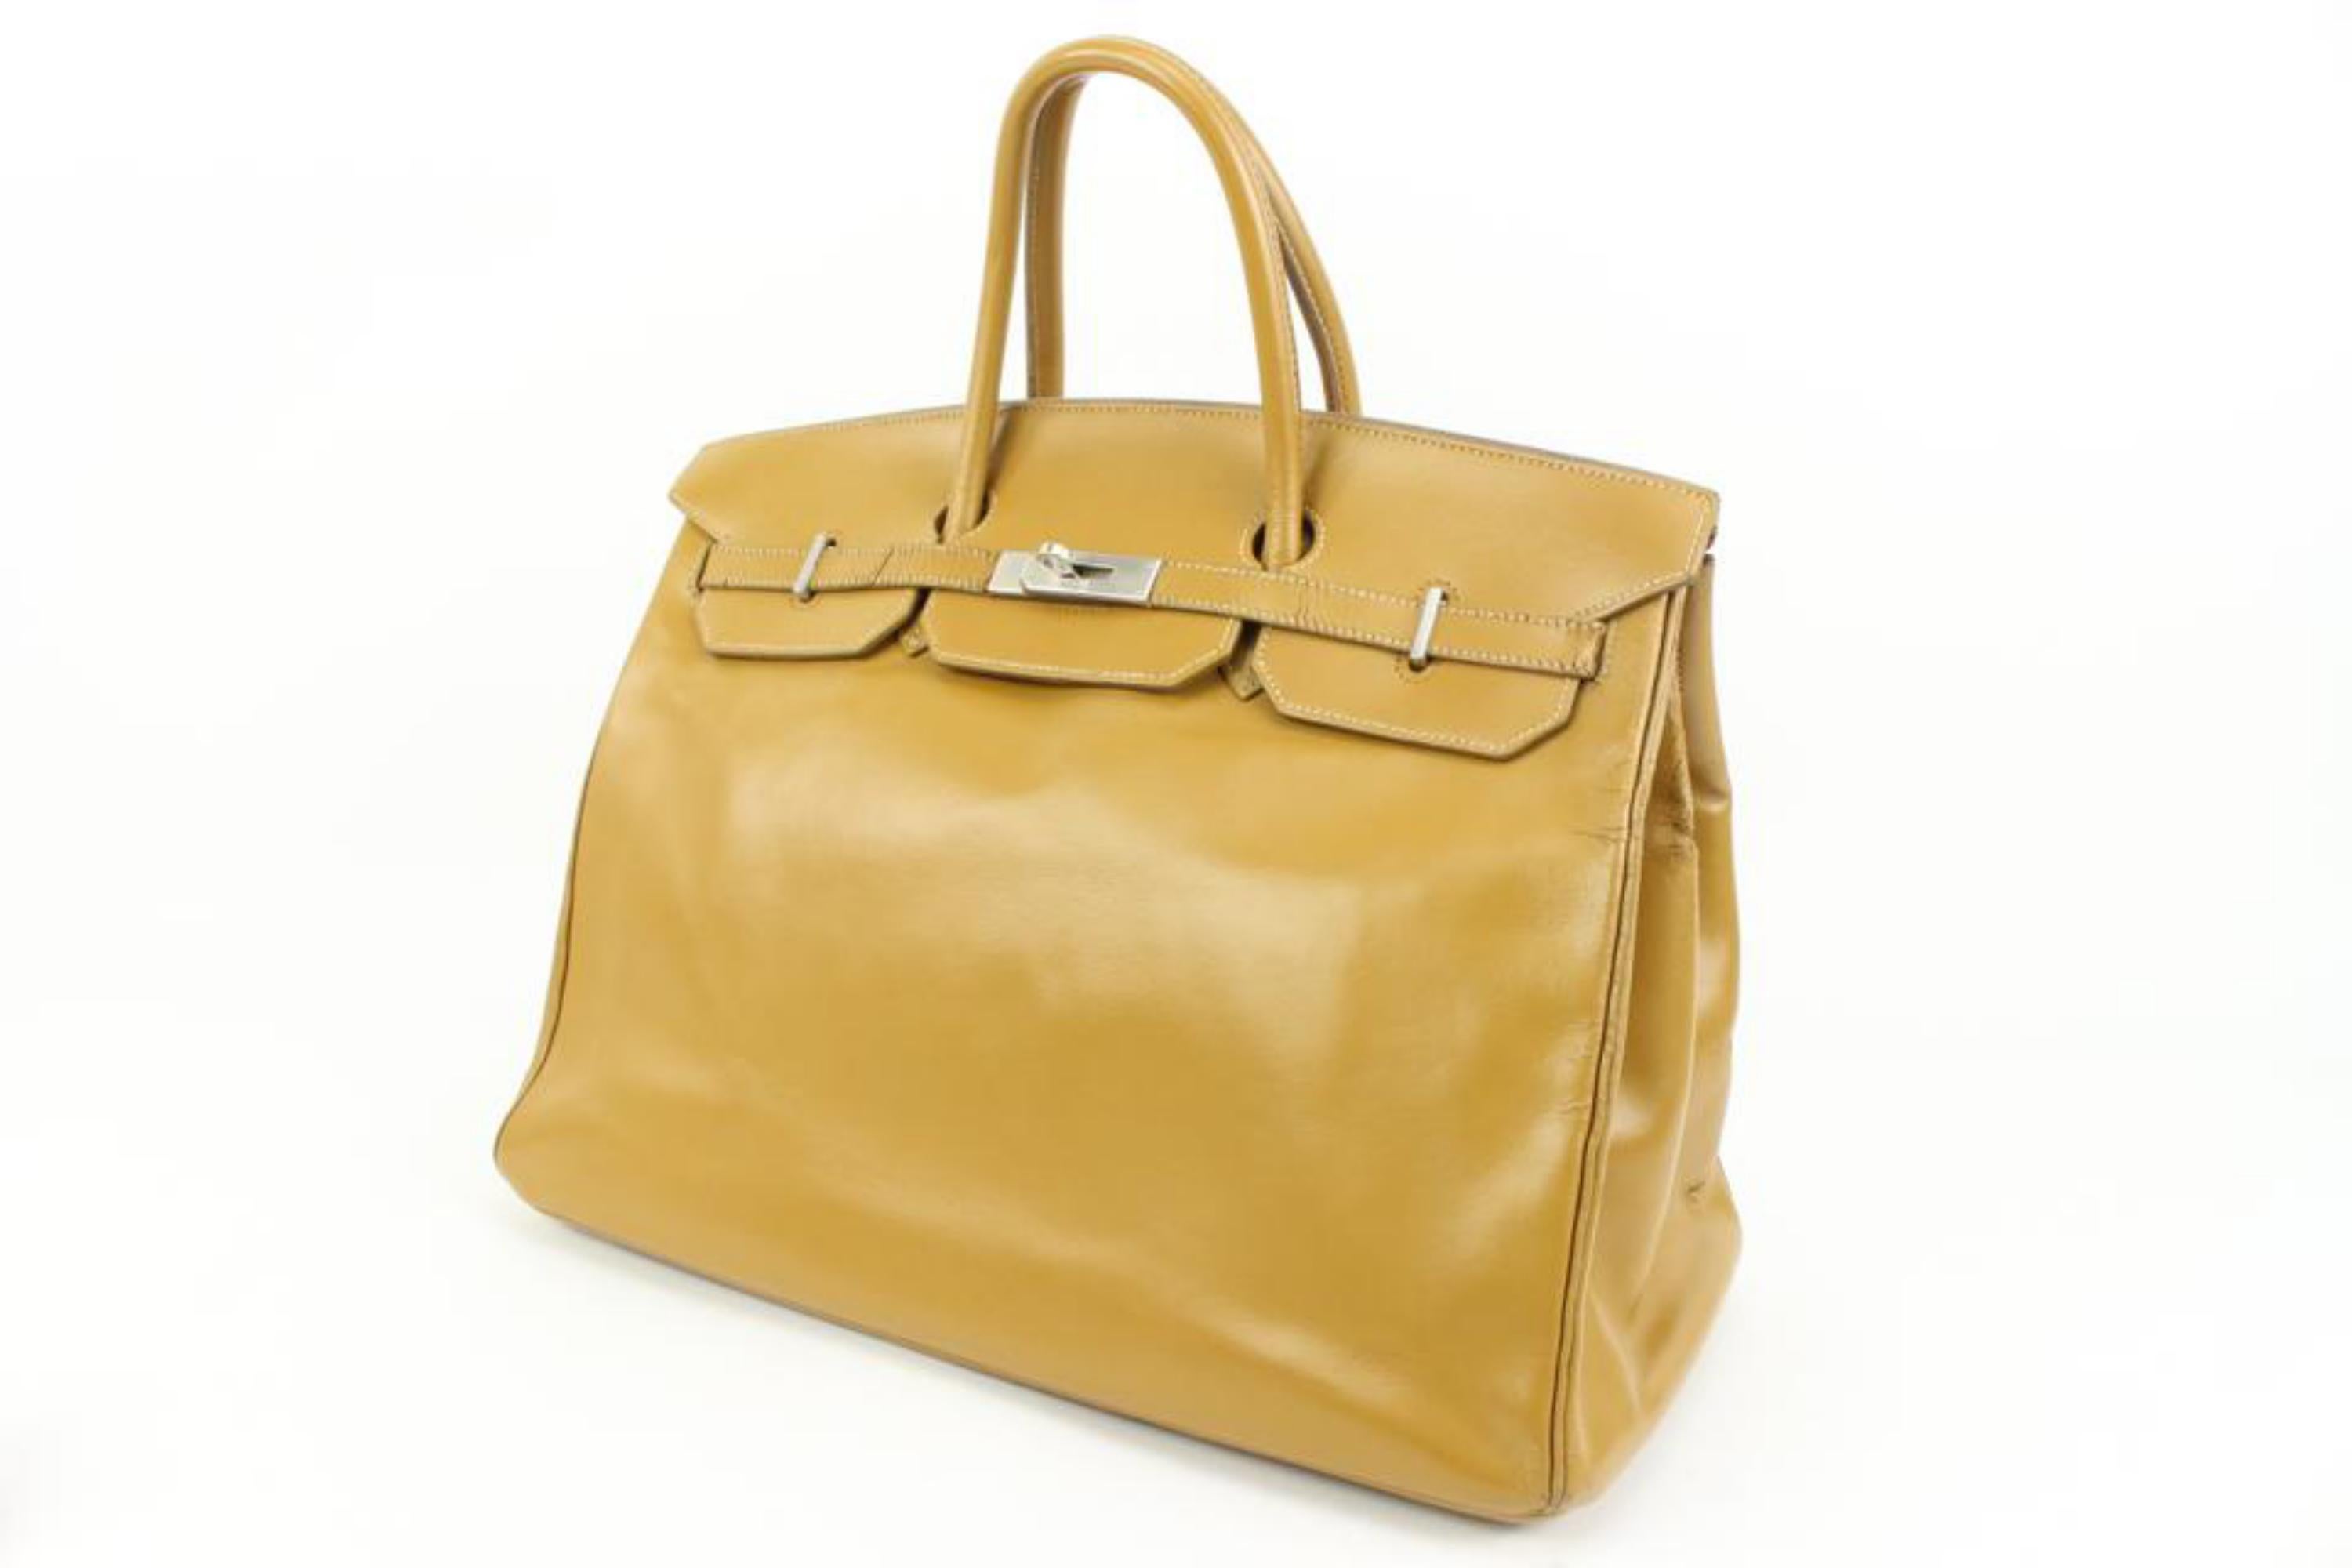 Hermès Large Mustard Yellow/Brown Birkin 40 s331h49
Date Code/Serial Number: C in a Square
Made In: France
Measurements: Length:  16